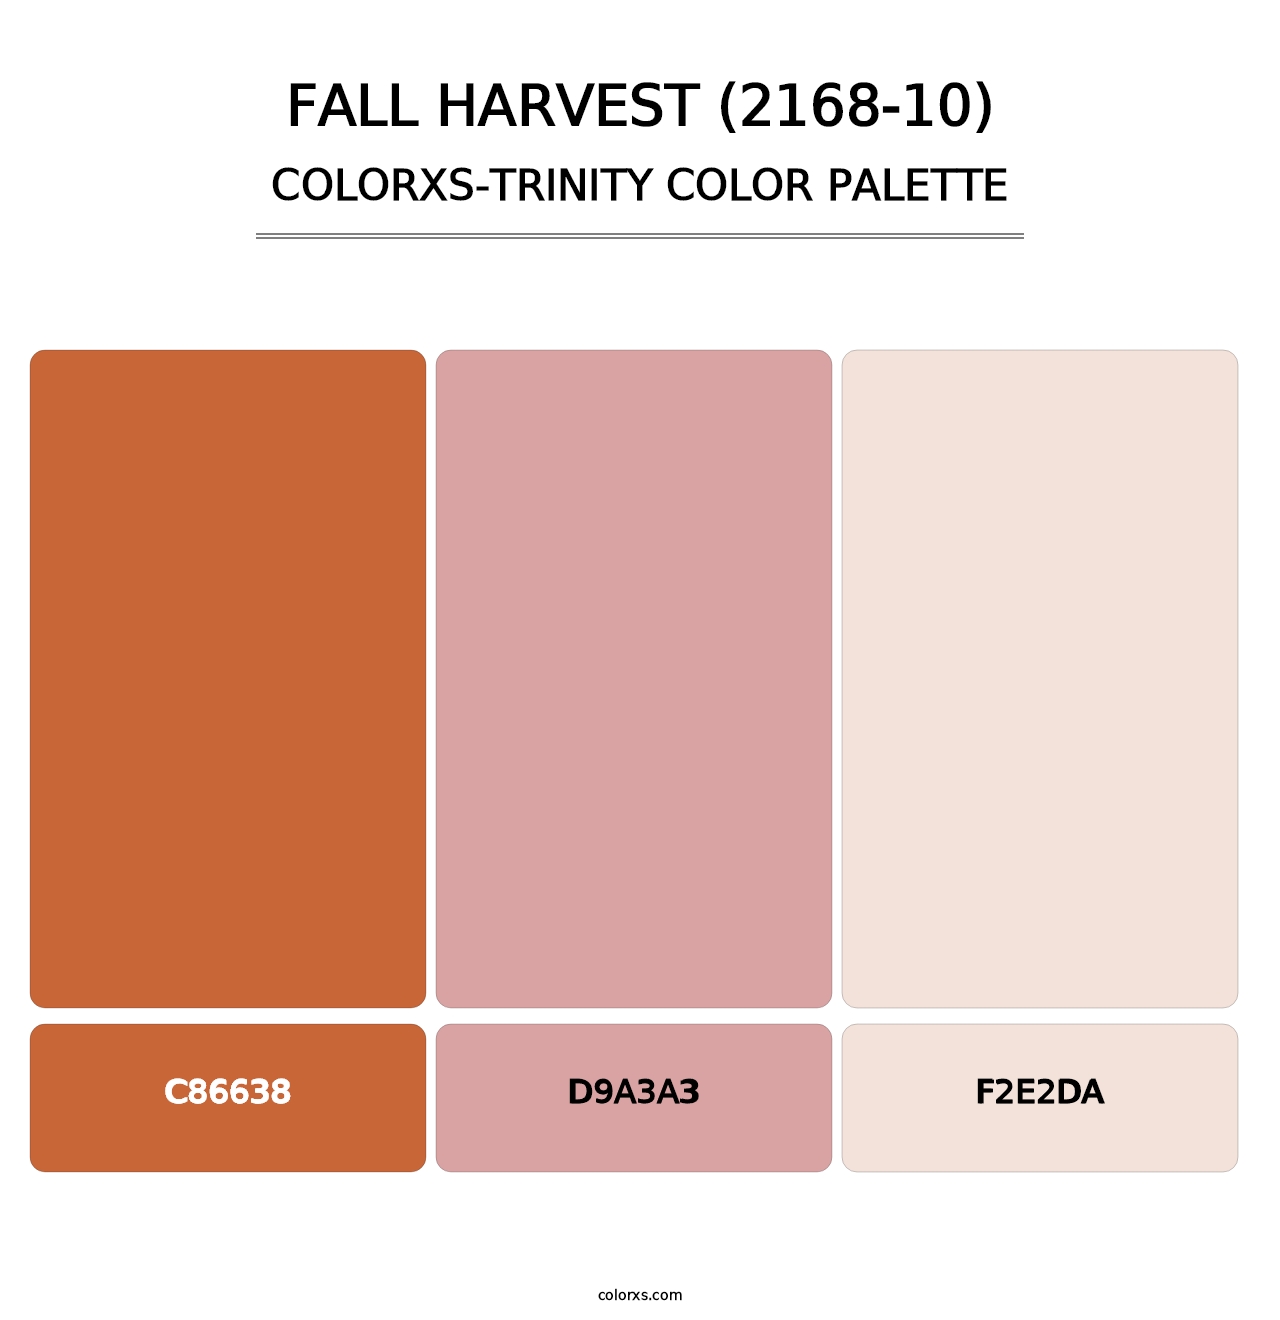 Fall Harvest (2168-10) - Colorxs Trinity Palette